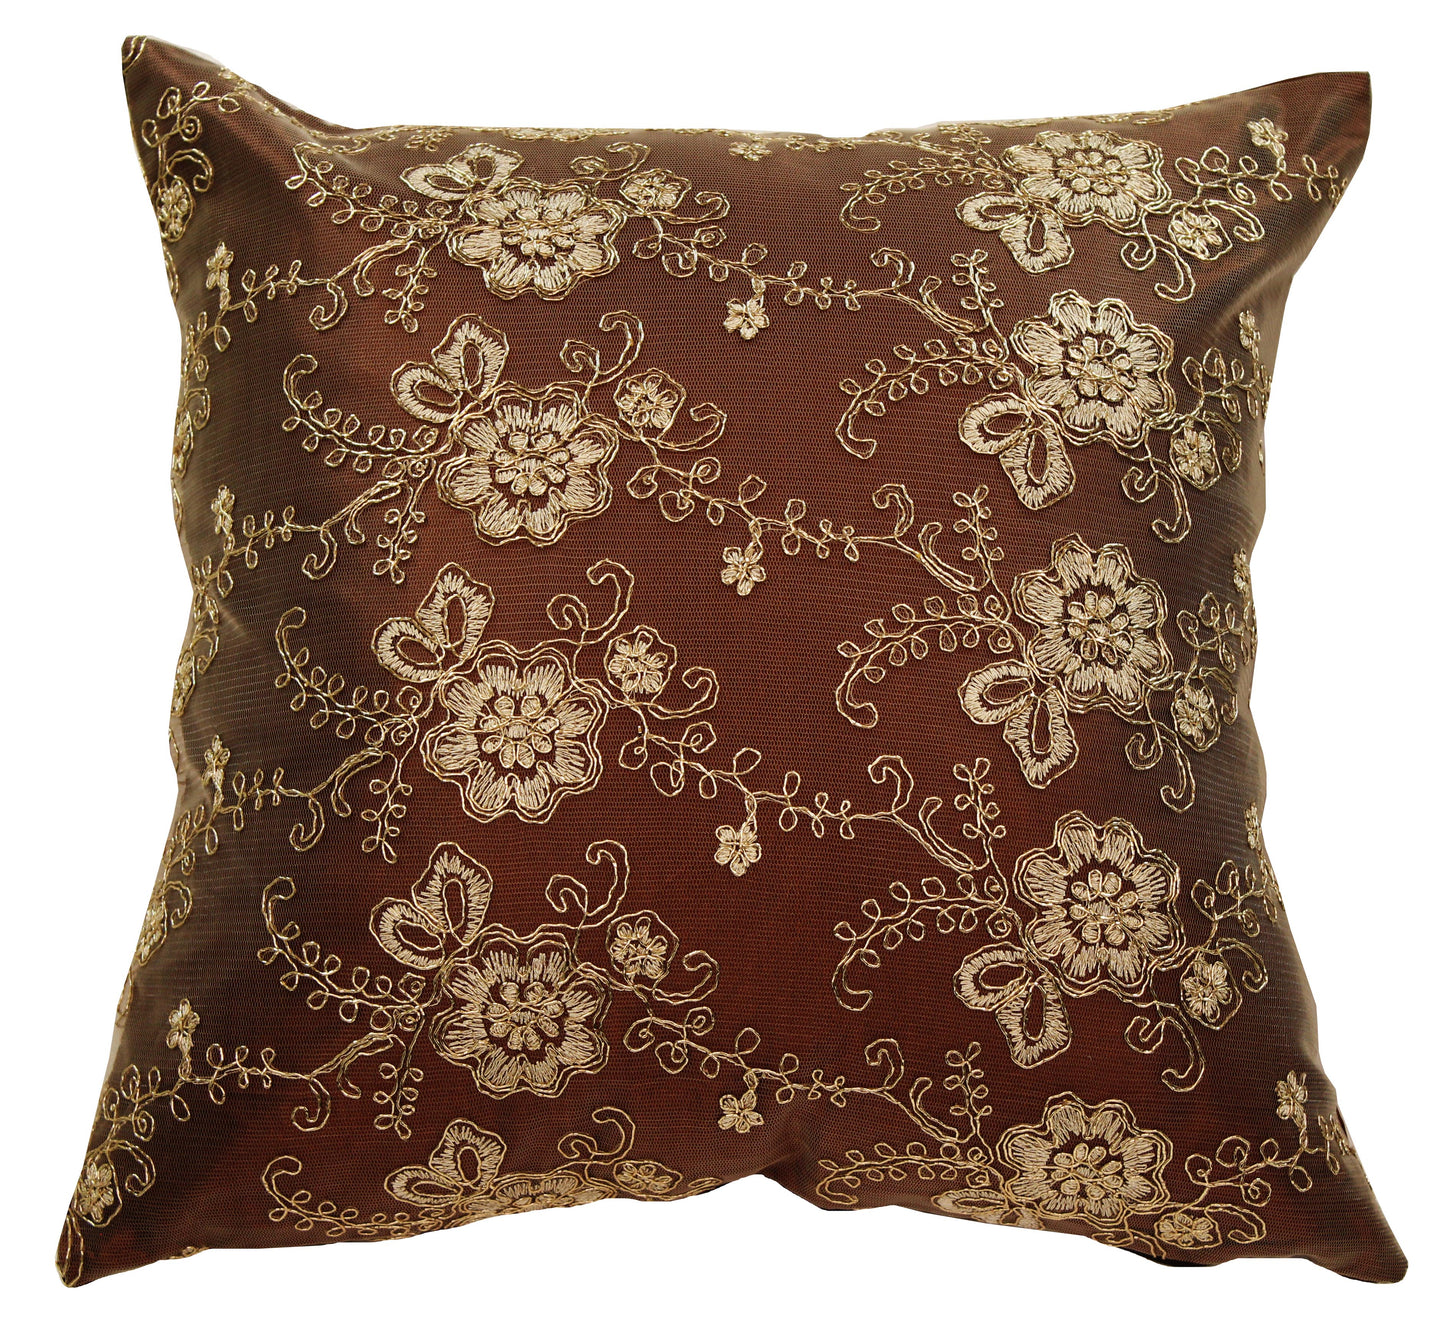 Swiss Vintage Flowers Pattern Decorative Accent Throw Pillow